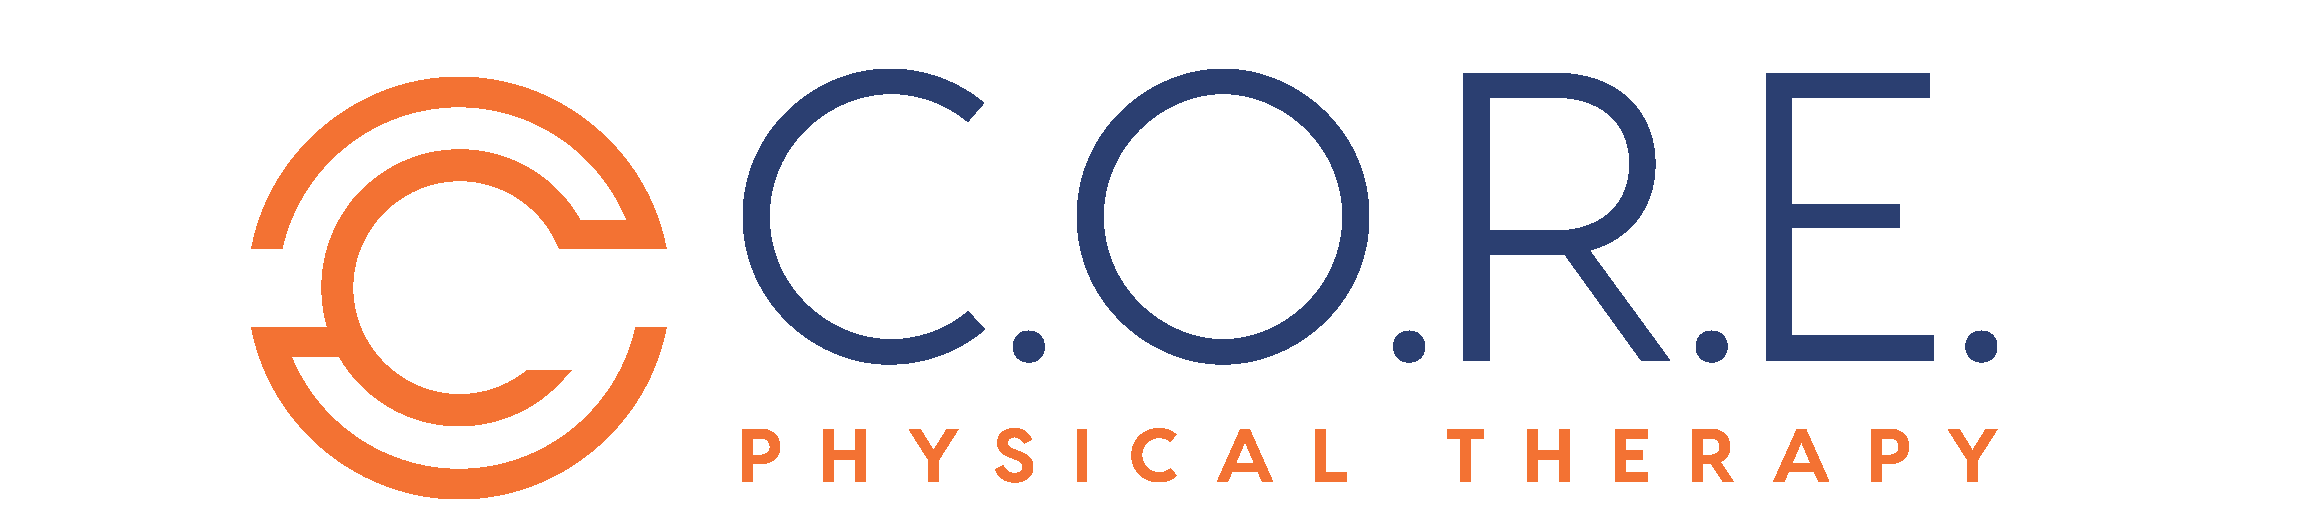 C.O.R.E. Physical Therapy